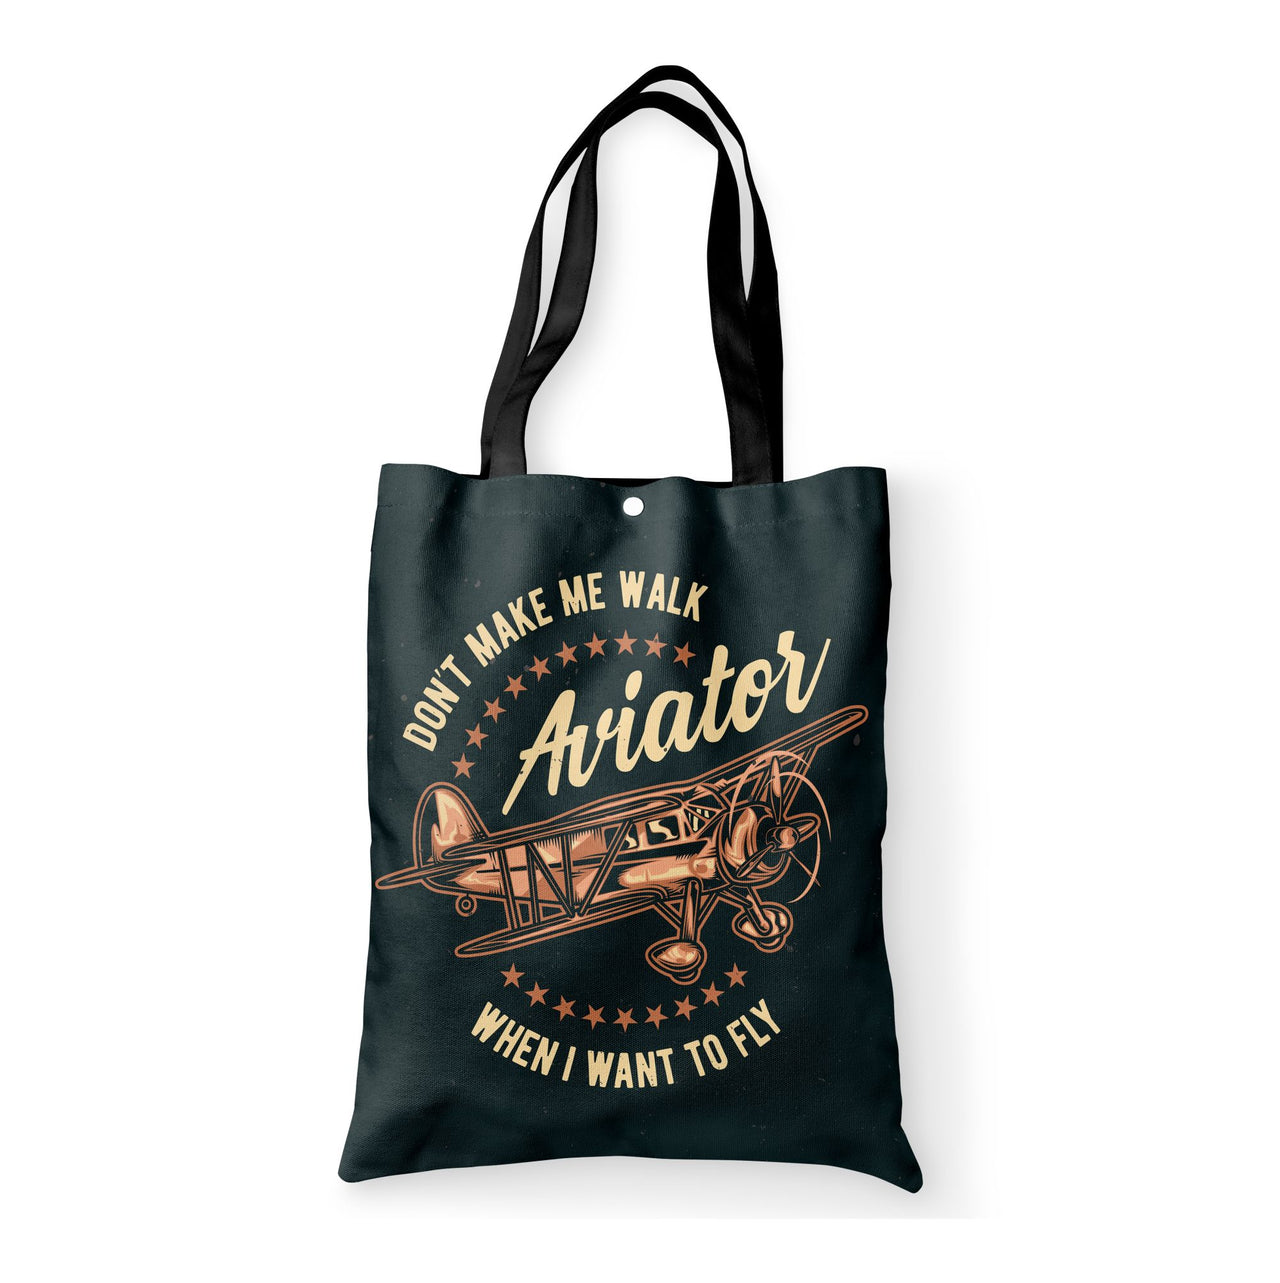 Don't Make me Walk When I want To Fly Designed Tote Bags